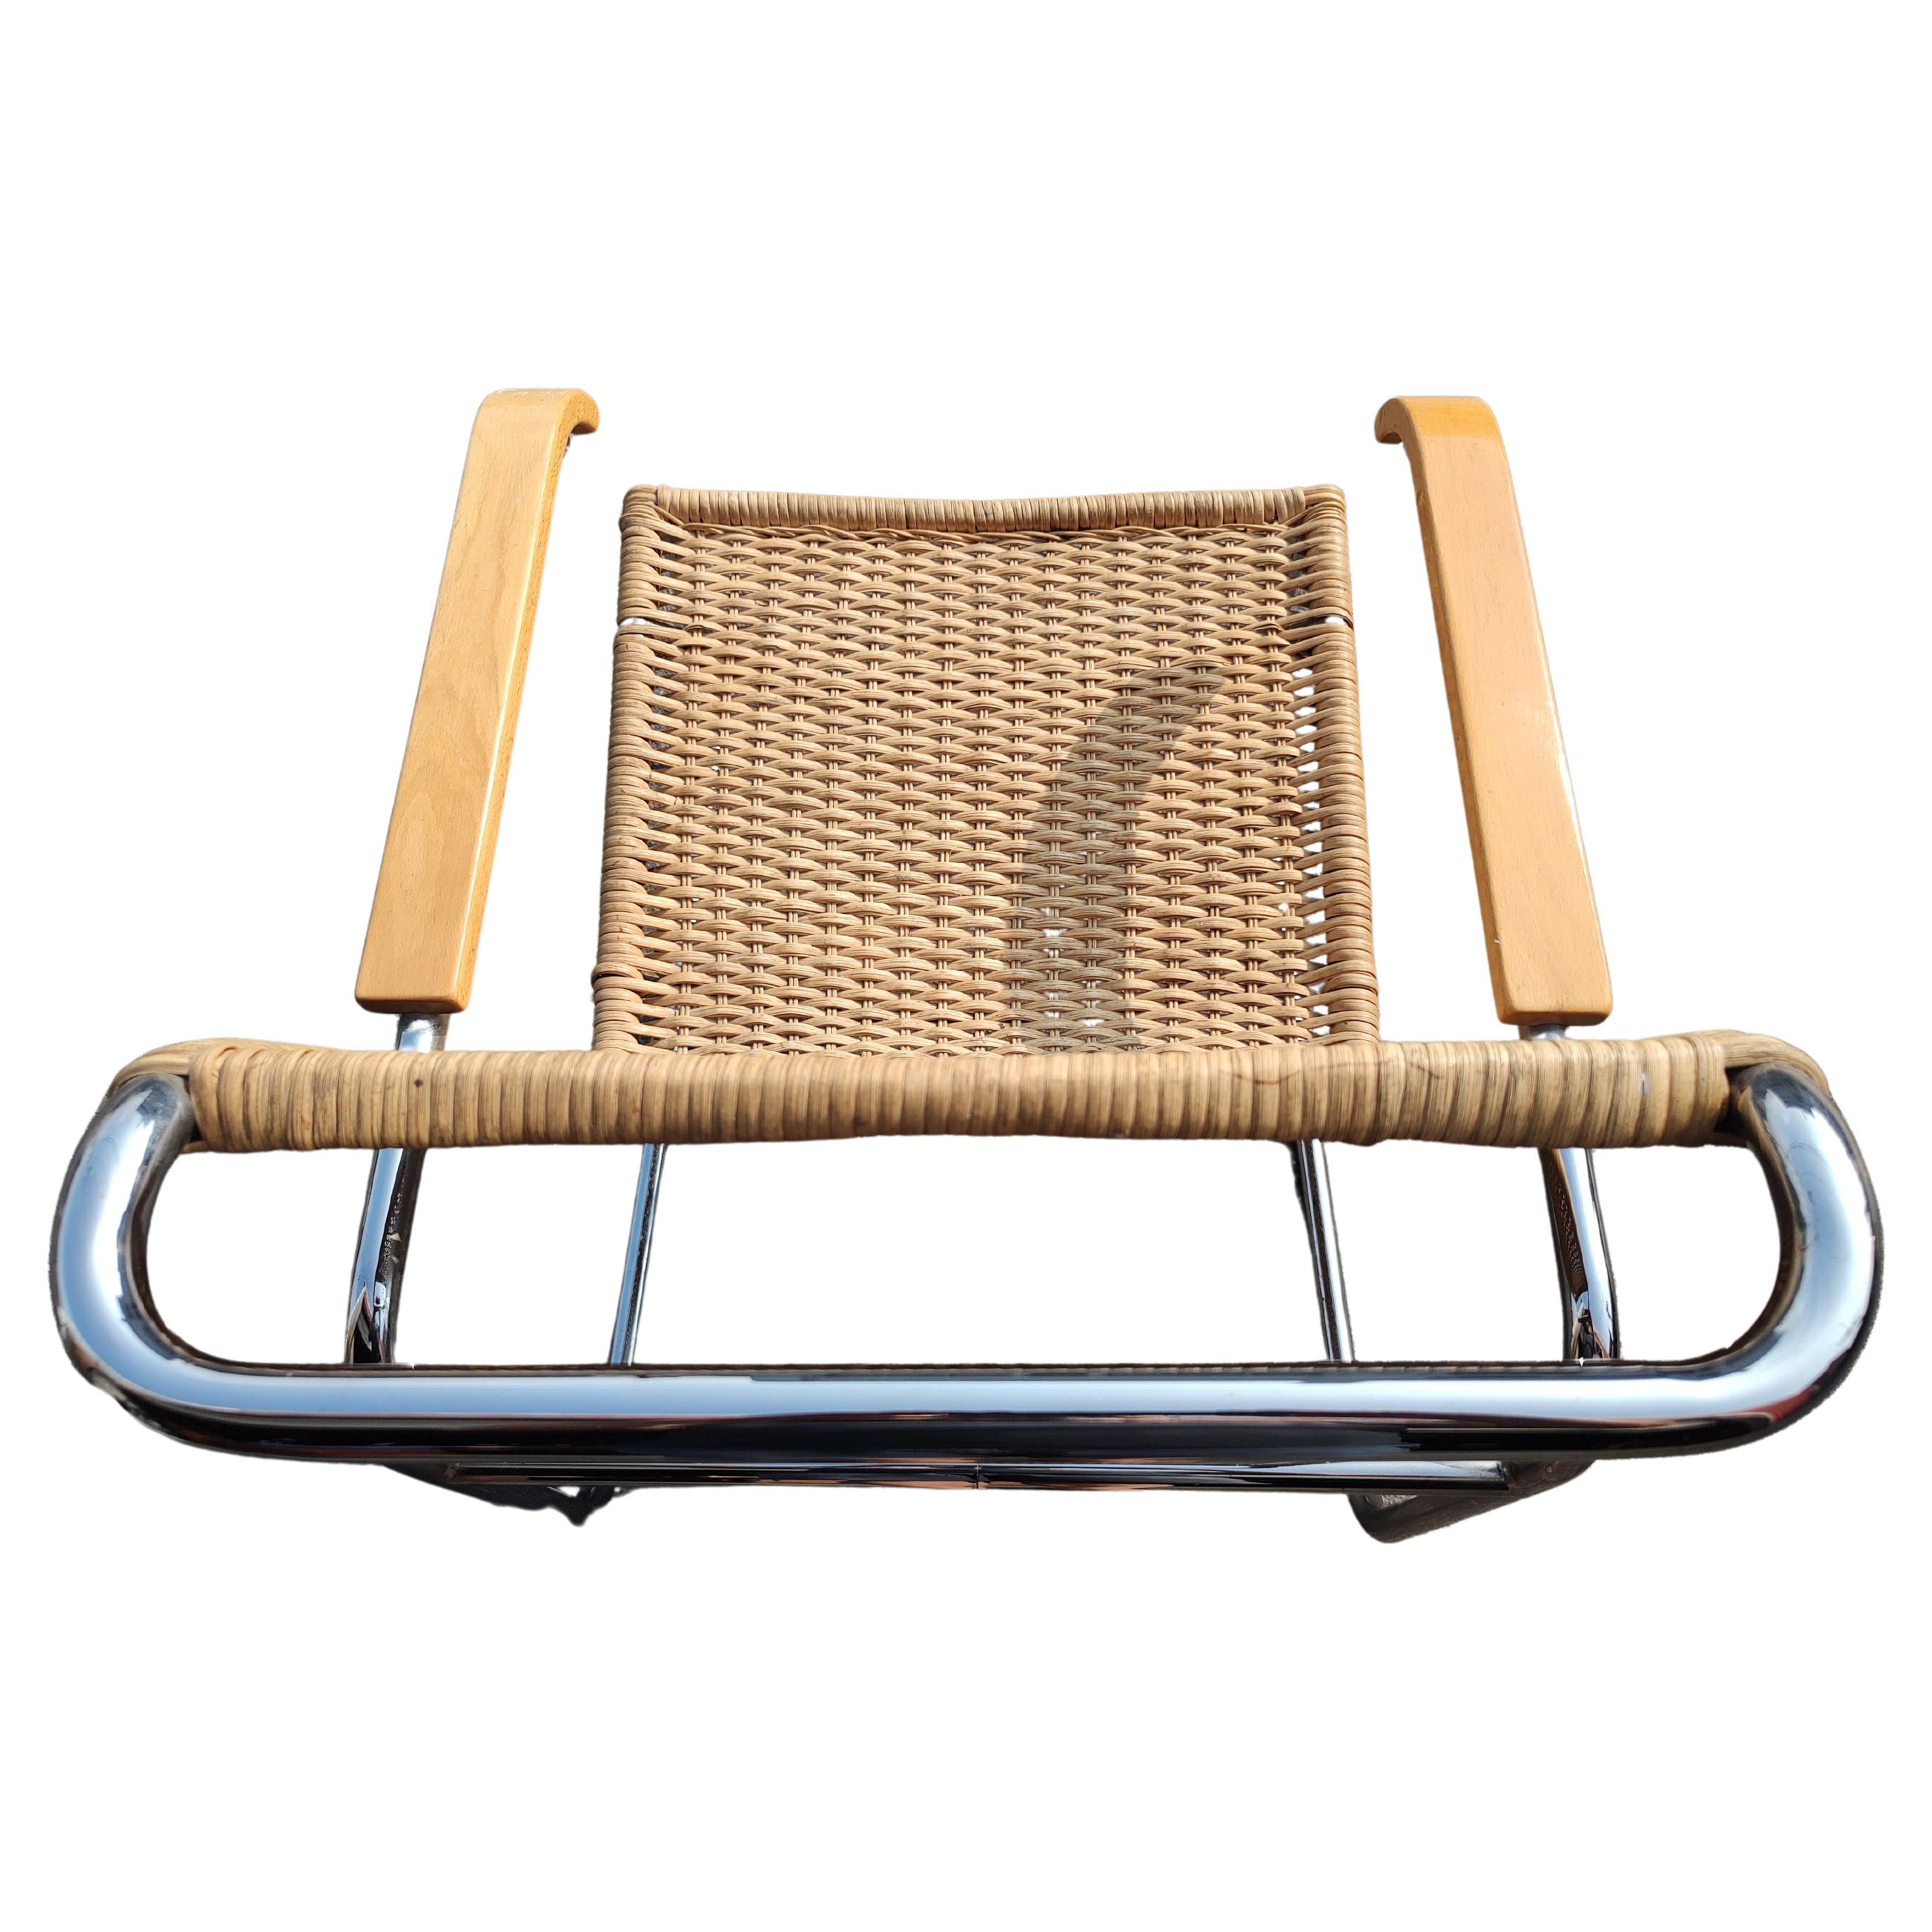 Fabulous and iconic design by Marcel Breuer from the Bauhaus period of the late twenties. Cantilevered chrome arms with maple armrests which wrap around the wicker body in a continuous motion. This particular B-35 model is from c1970 and made in